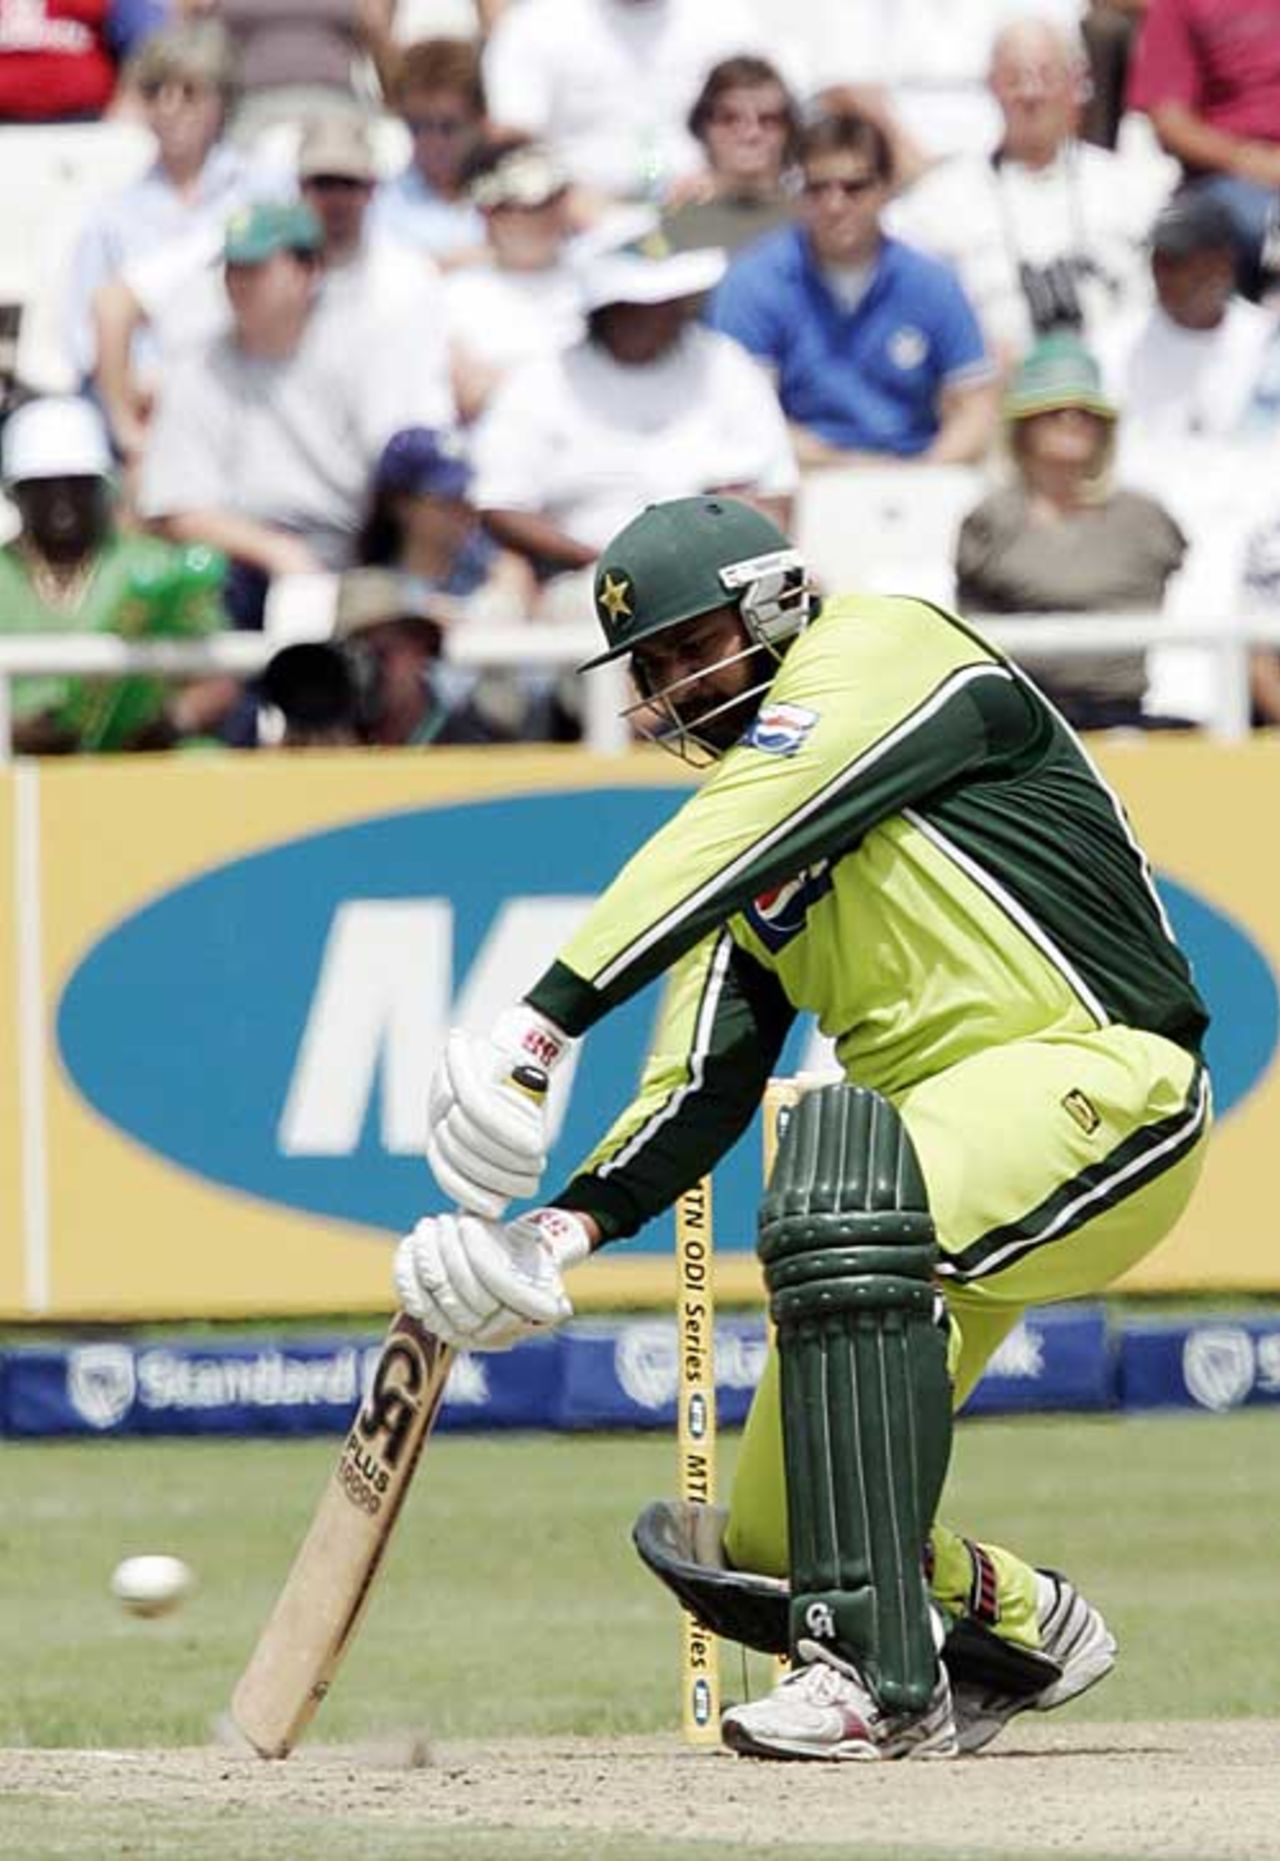 Inzamam-ul-Haq drives as he tries to rescue Pakistan, South Africa v Pakistan, 4th ODI, Cape Town, February 11, 2007